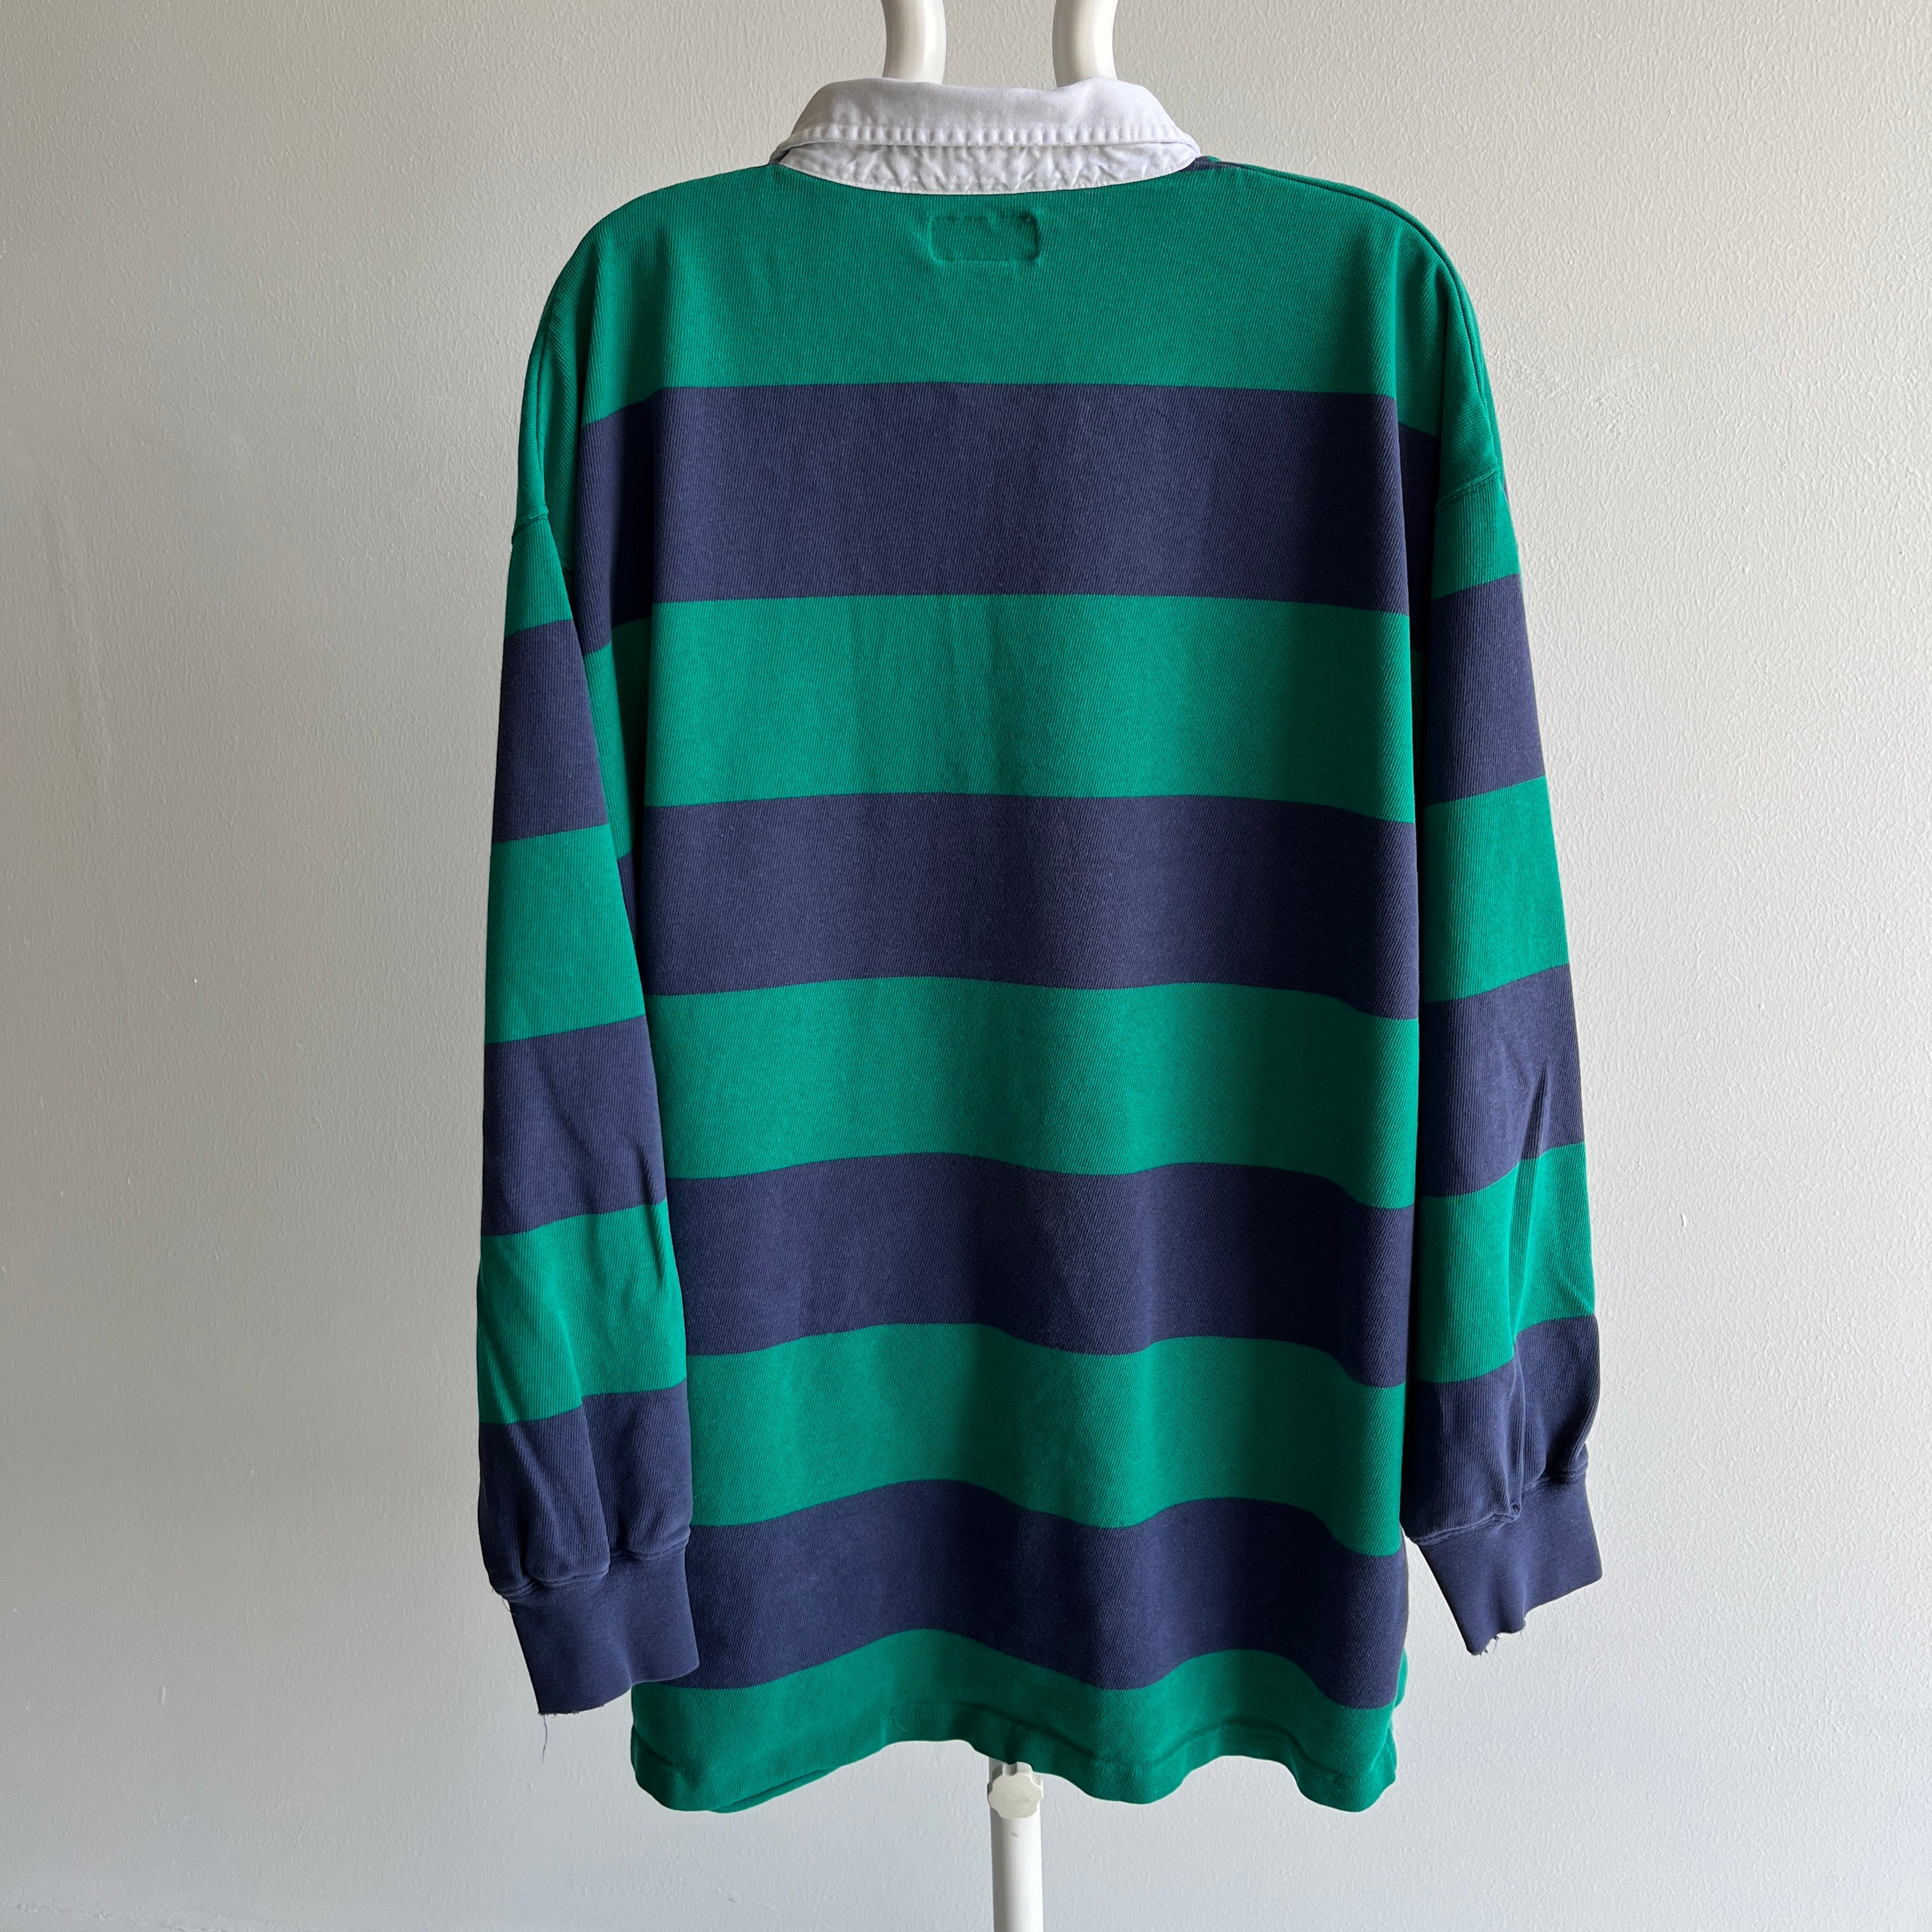 1990/2000s Soft Striped Rugby Shirt